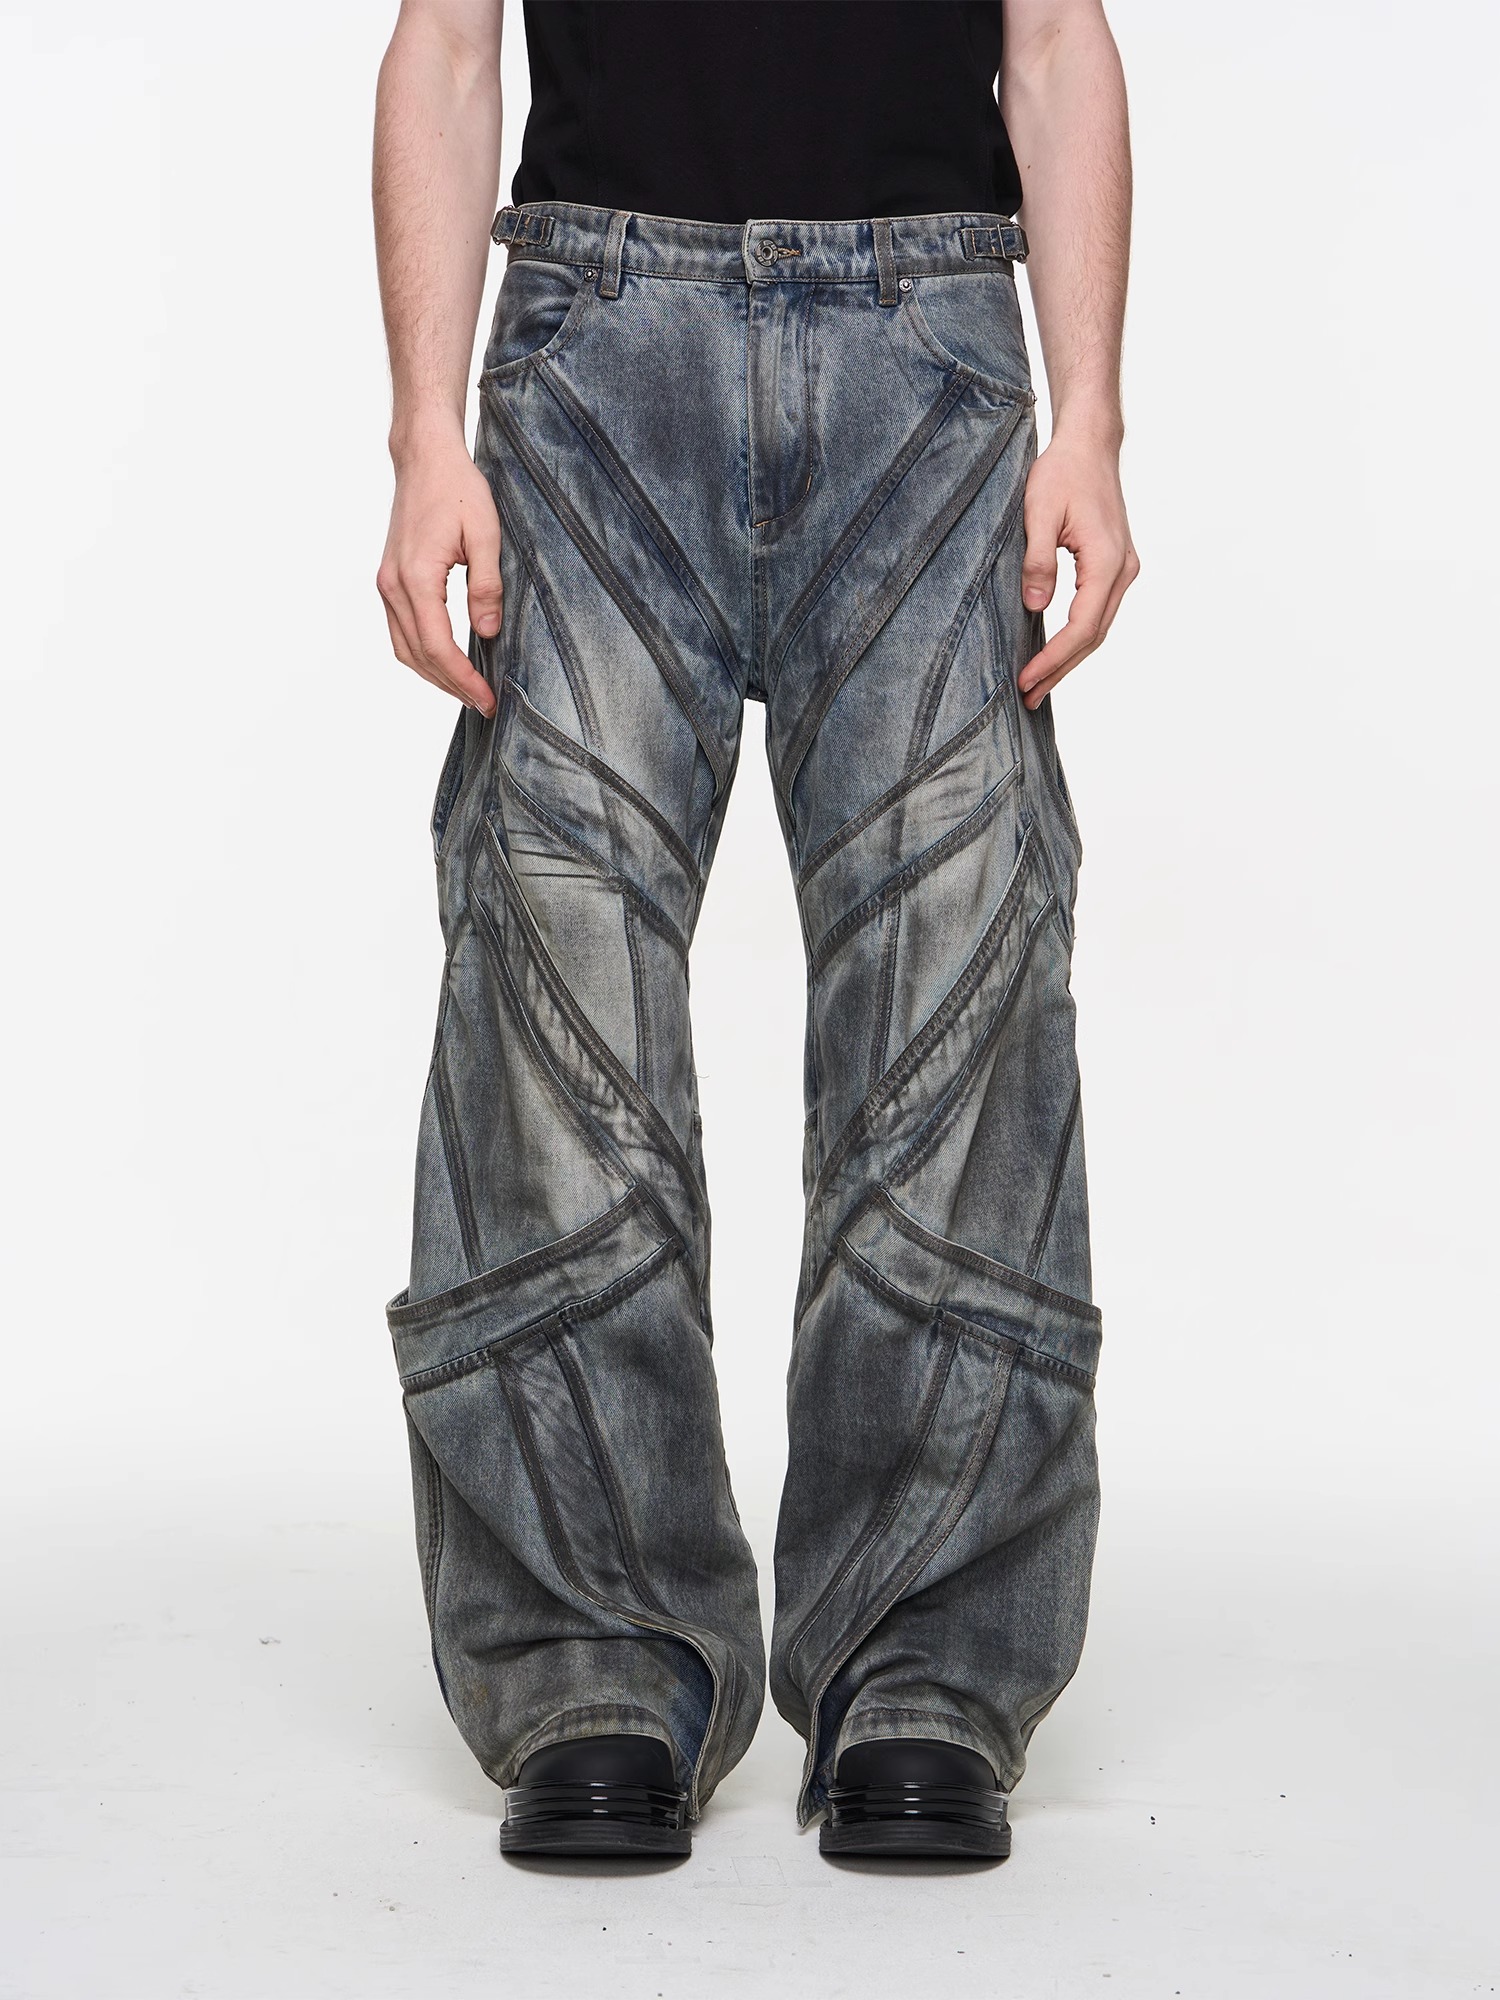 BLINDNOPLAN 24SS Multiple Flared Segmented Washed Distressed Jeans